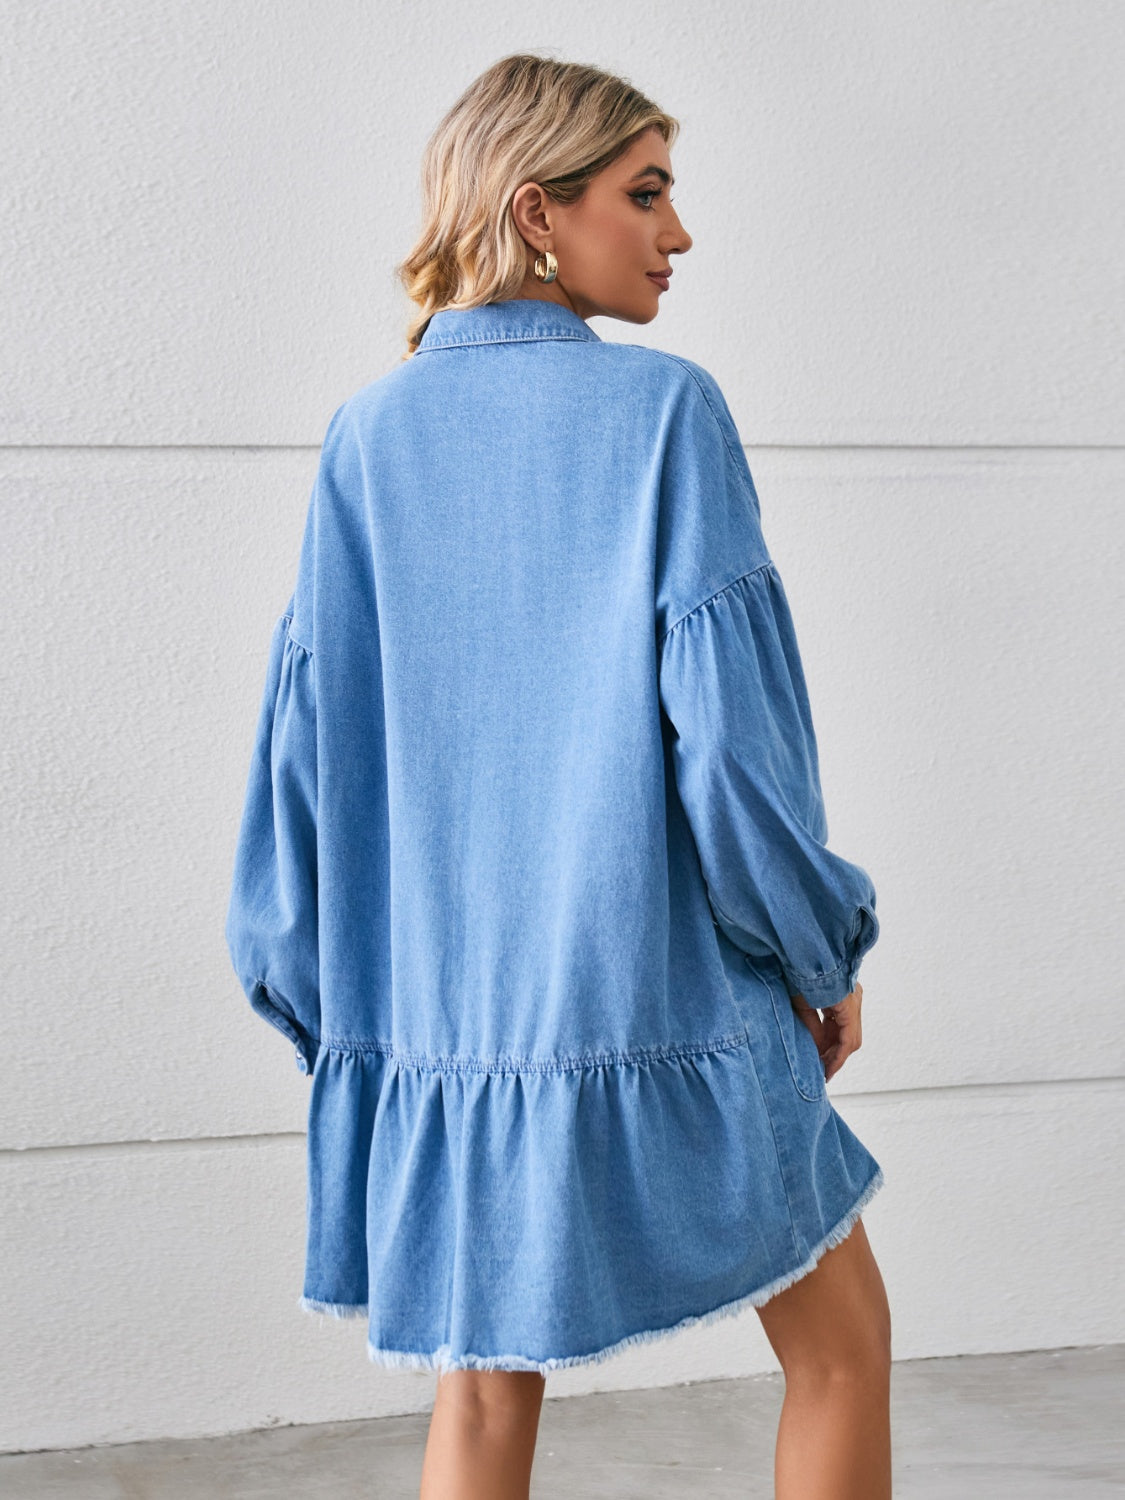 Chic denim dress with a trendy raw hem, comfy fit, button-up front, and handy pockets—perfect for a casual yet stylish look.